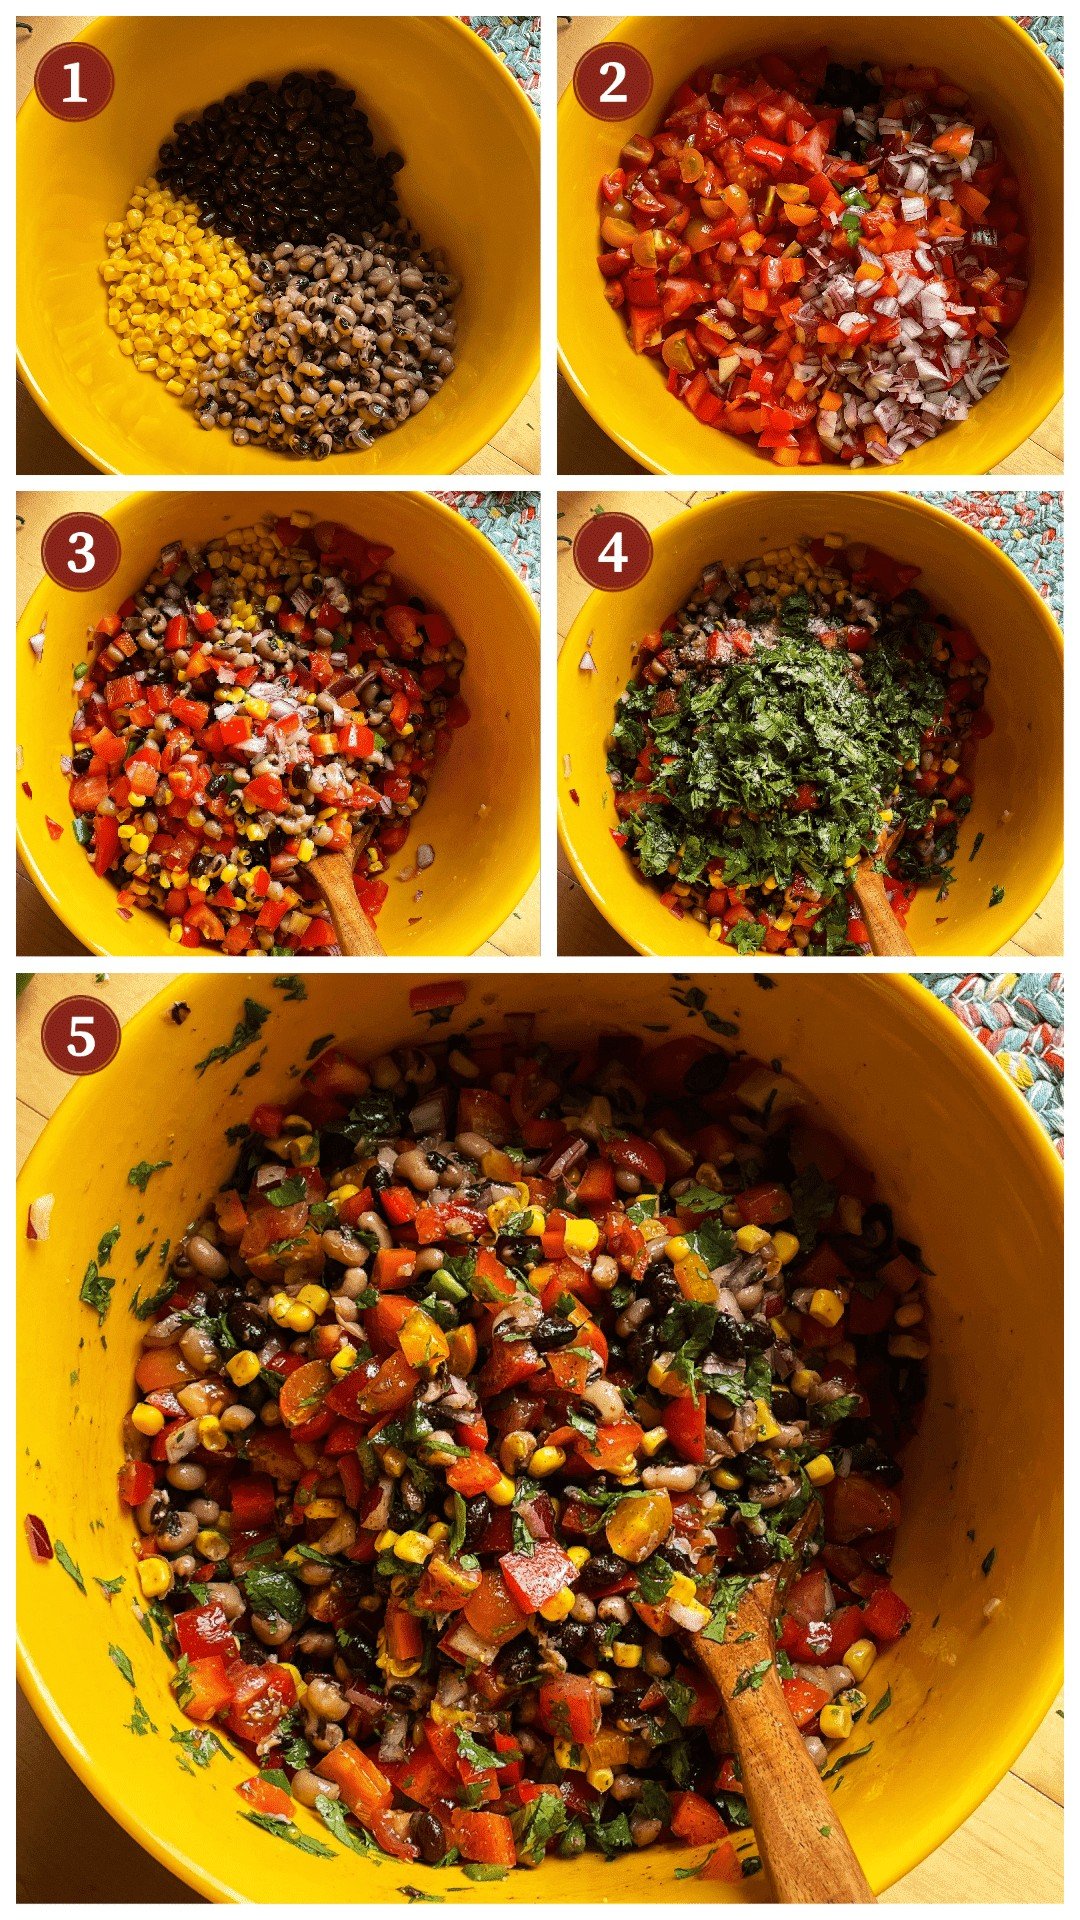 A collage of images showing how to mix the ingredients in redneck caviar, steps 1 - 5.